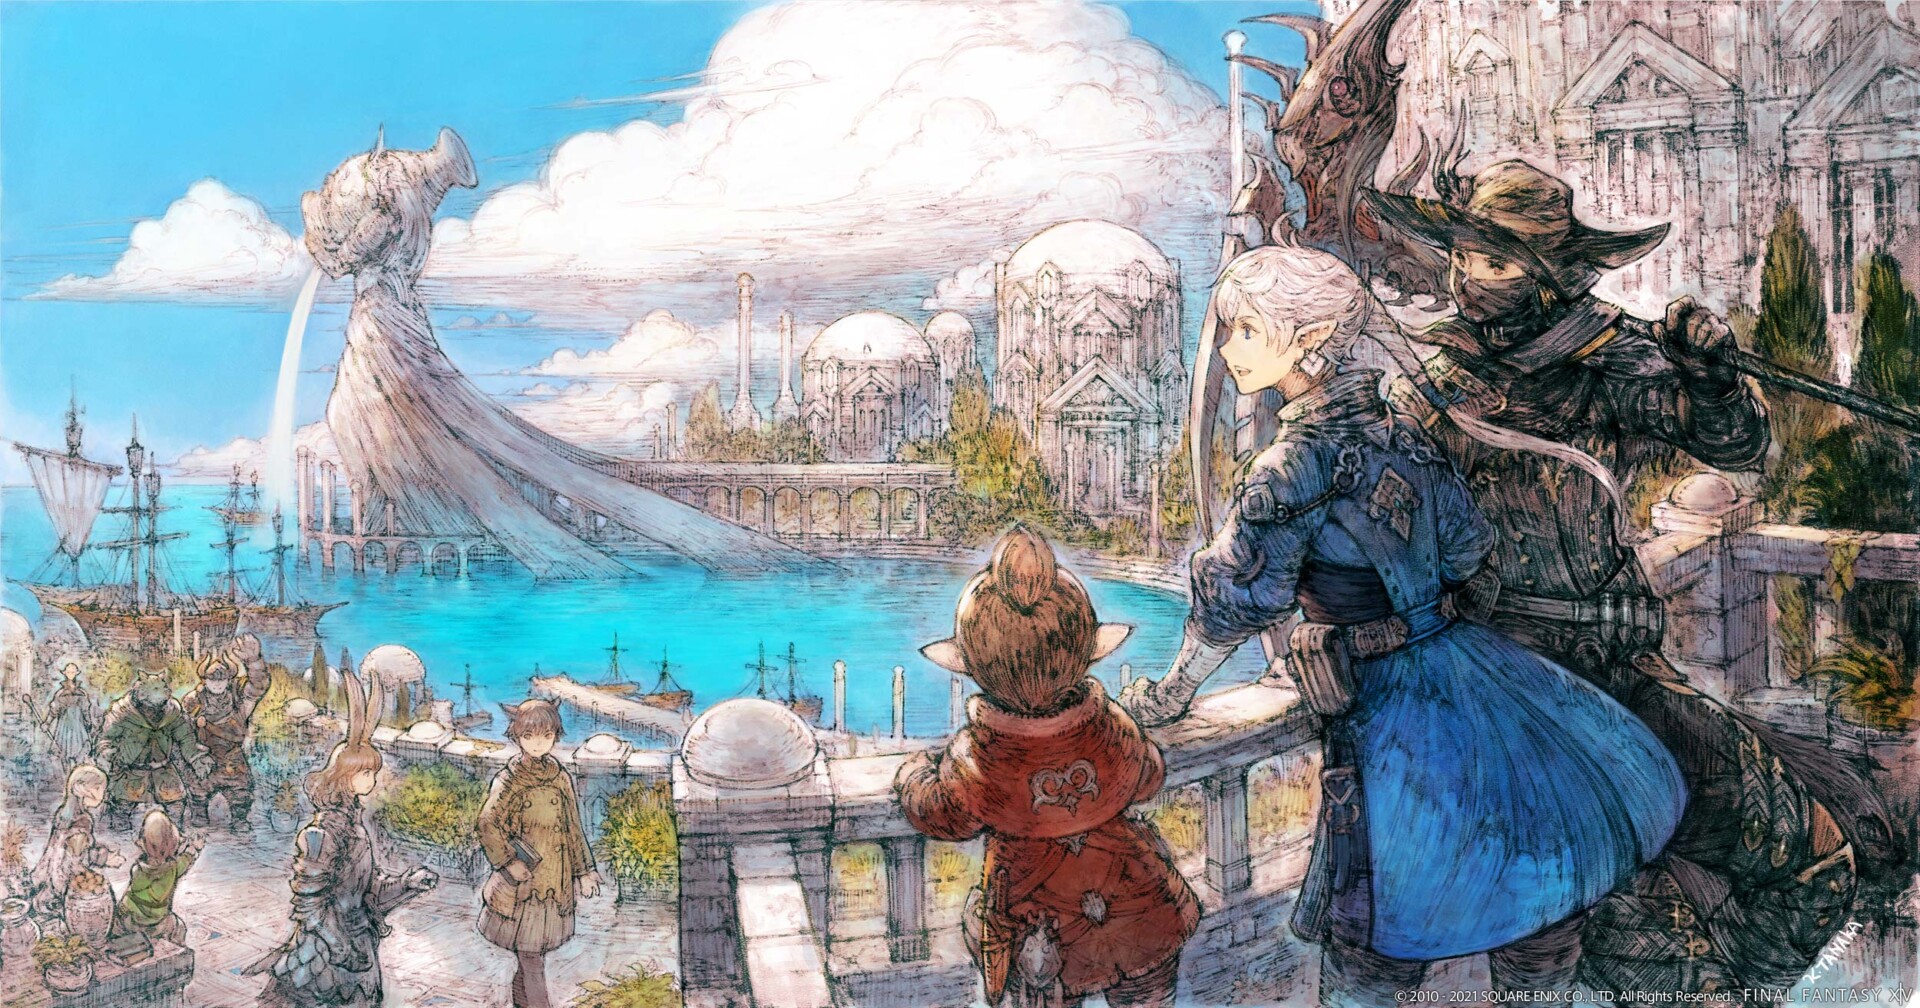 FFXIV Issues More Free Game Time and Suspends Sales in Effort to Combat Congestion Issues